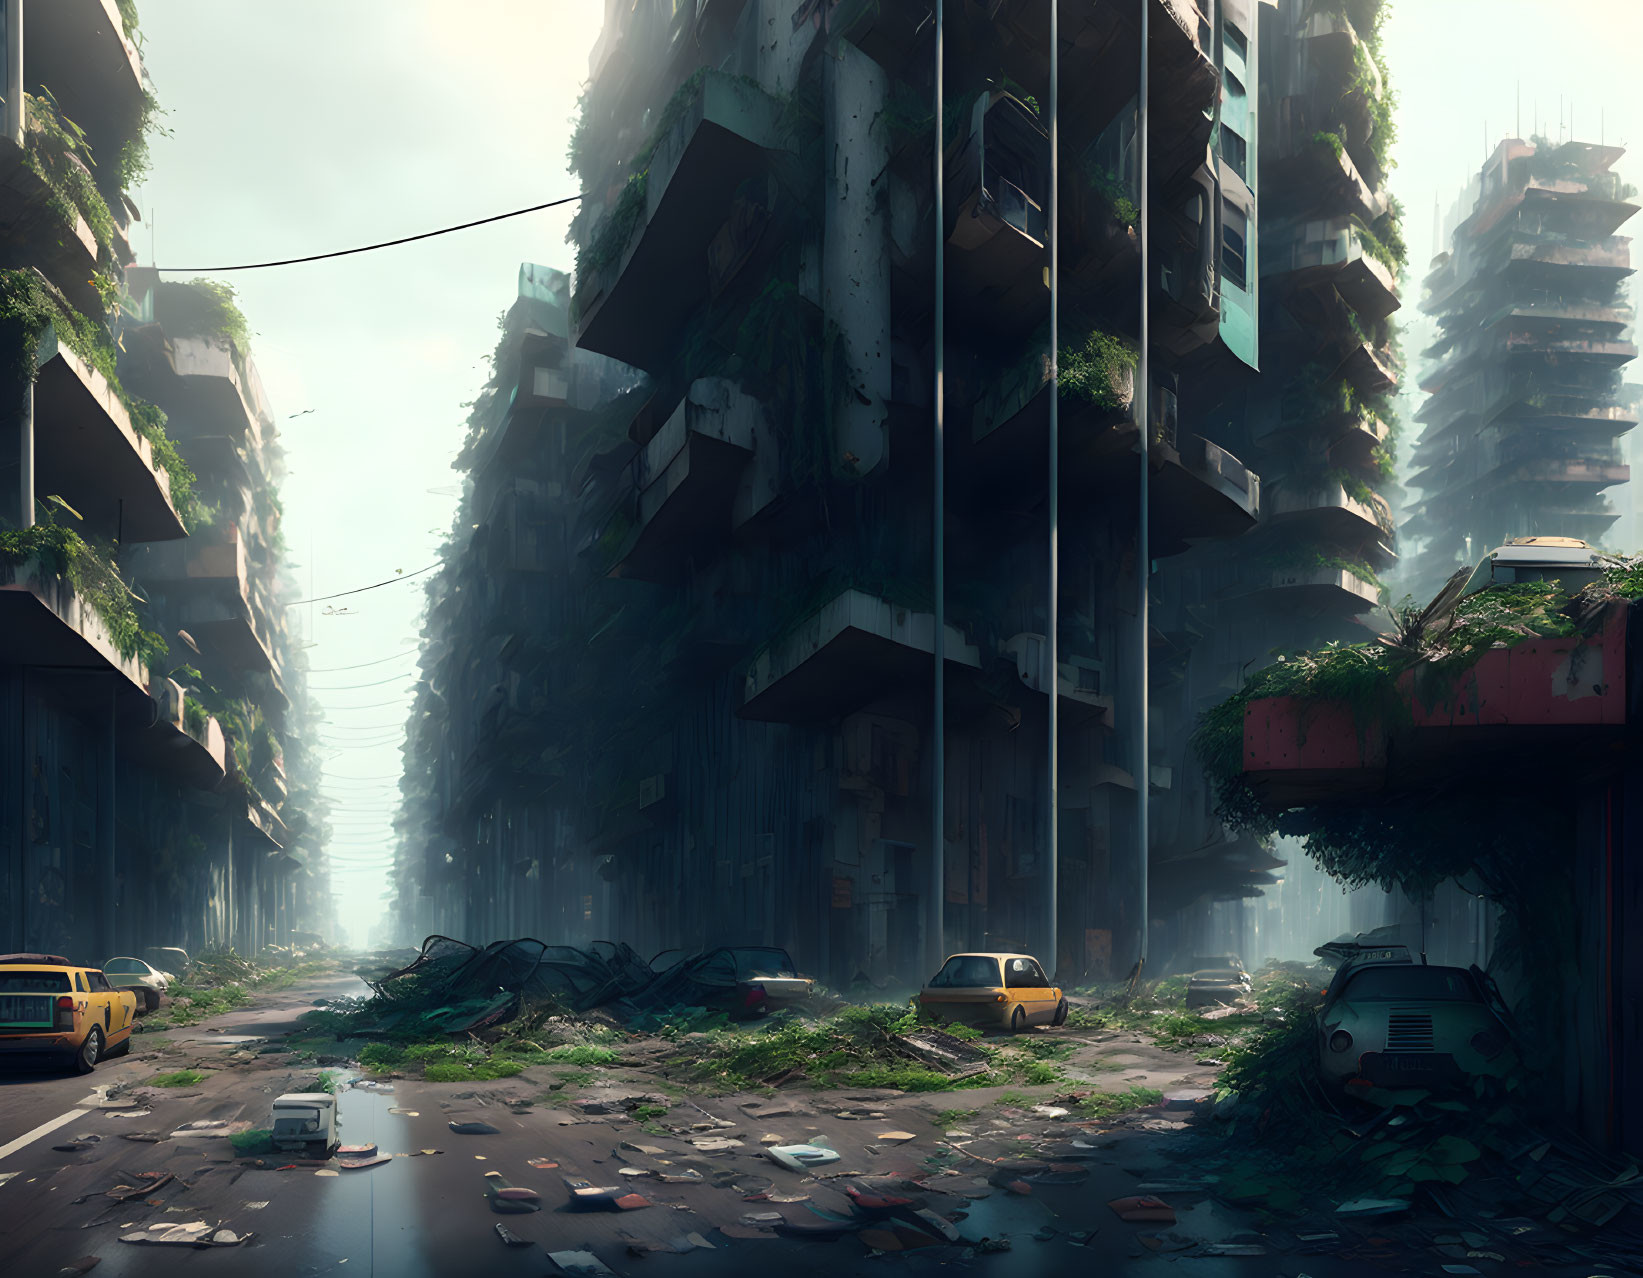 Abandoned post-apocalyptic city street with overgrown greenery